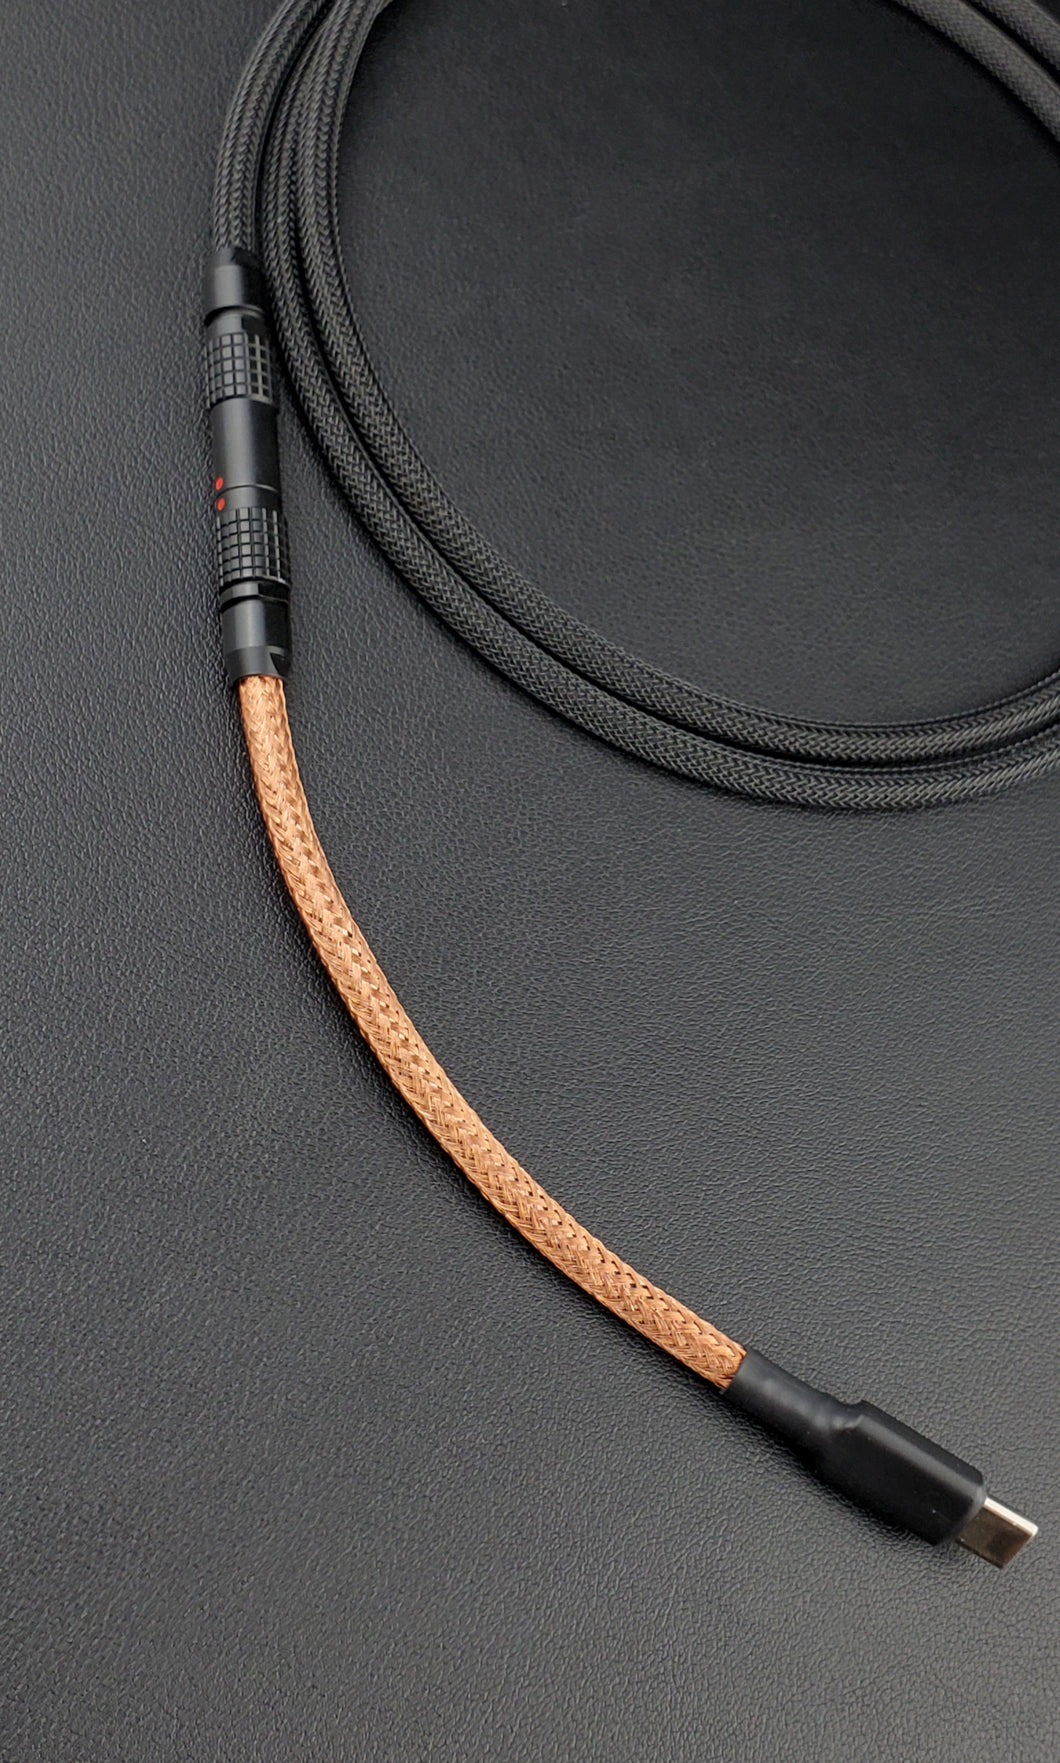 Copper Sleeved // straight cable // Black premium push/pull